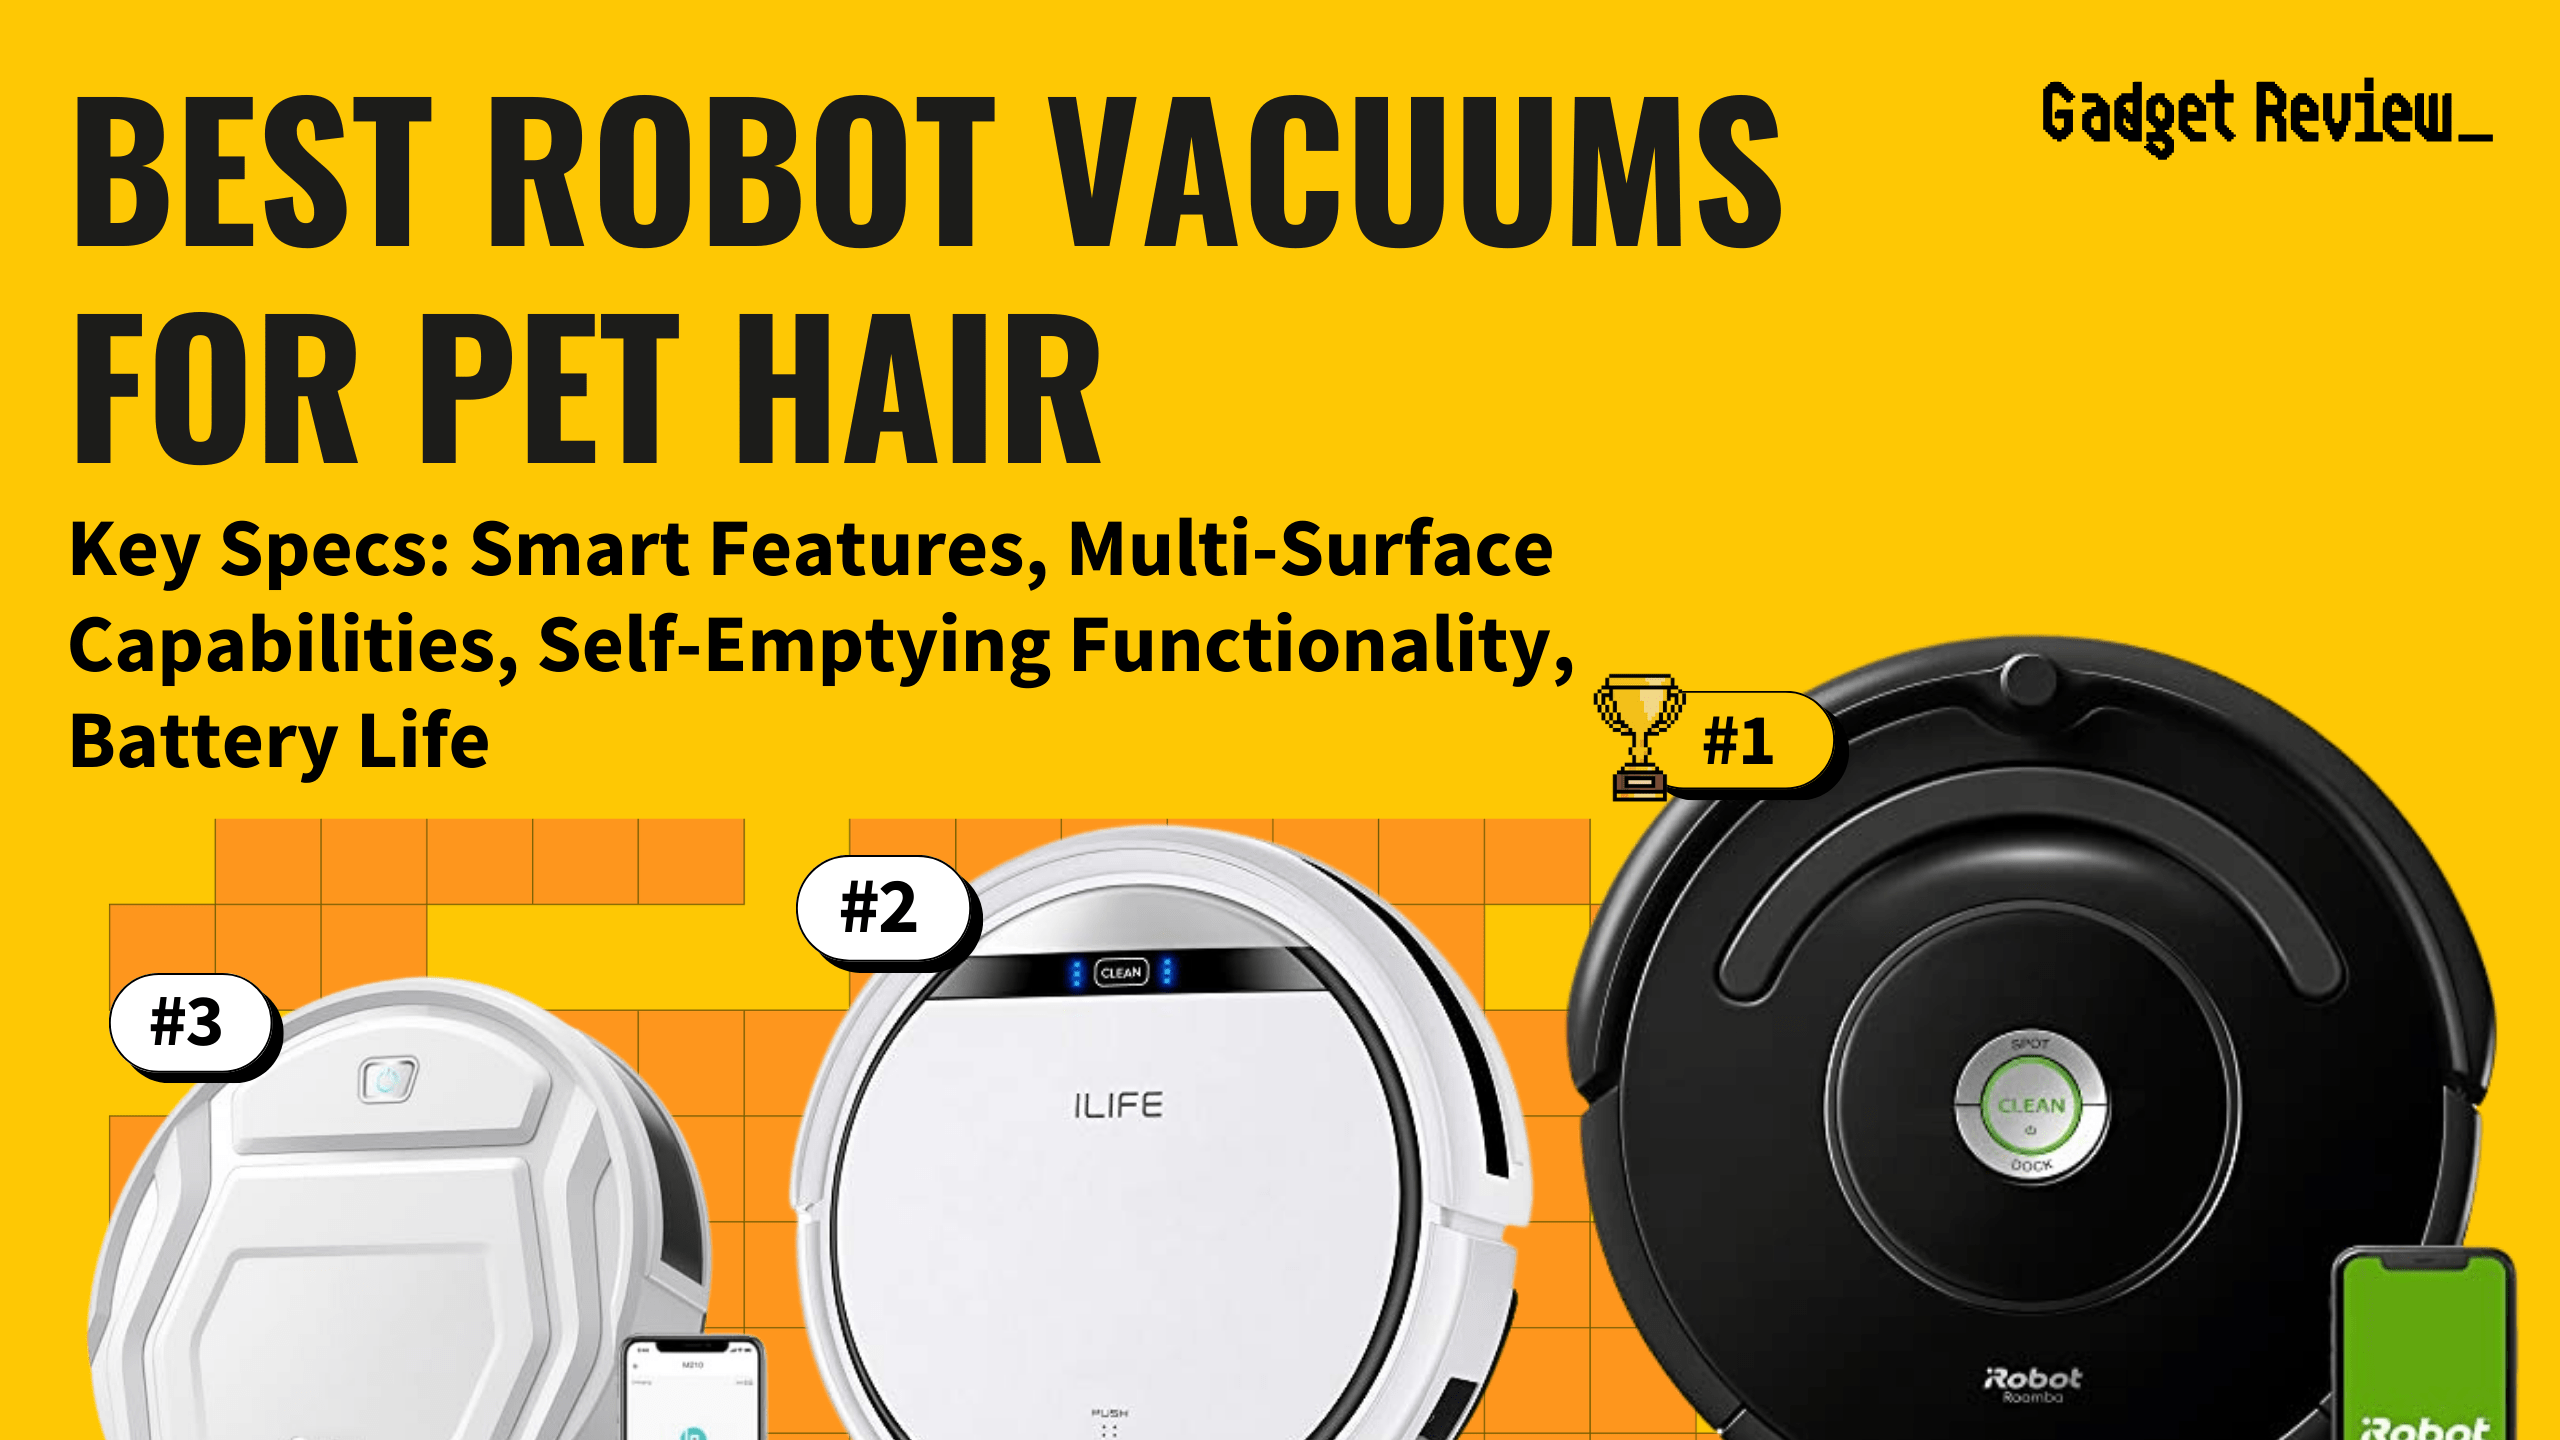 best robot vacuum for pet hair guide that shows the top best vacuum cleaner model